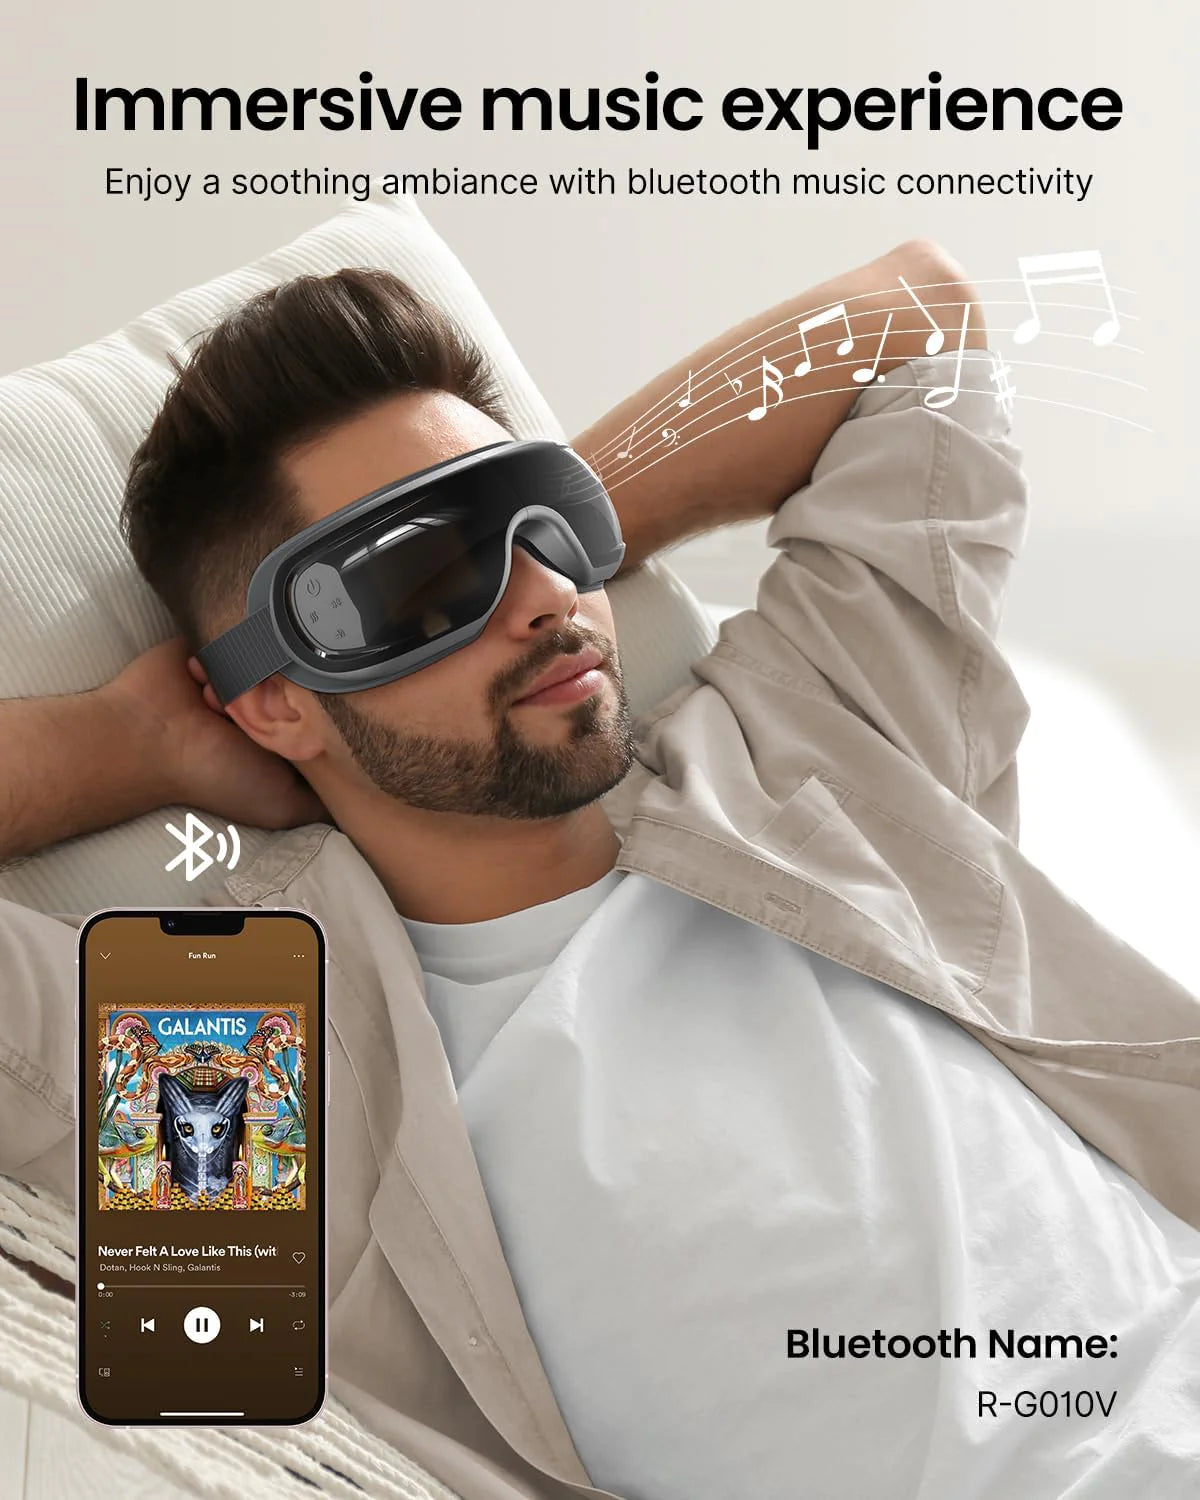 A man lounges on a couch wearing an Eyeris 3 Eye Massager by Renpho EU and a VR headset, enjoying music connected via Bluetooth to his smartphone, which displays an album cover. The image promotes an immersive and relaxing music experience.